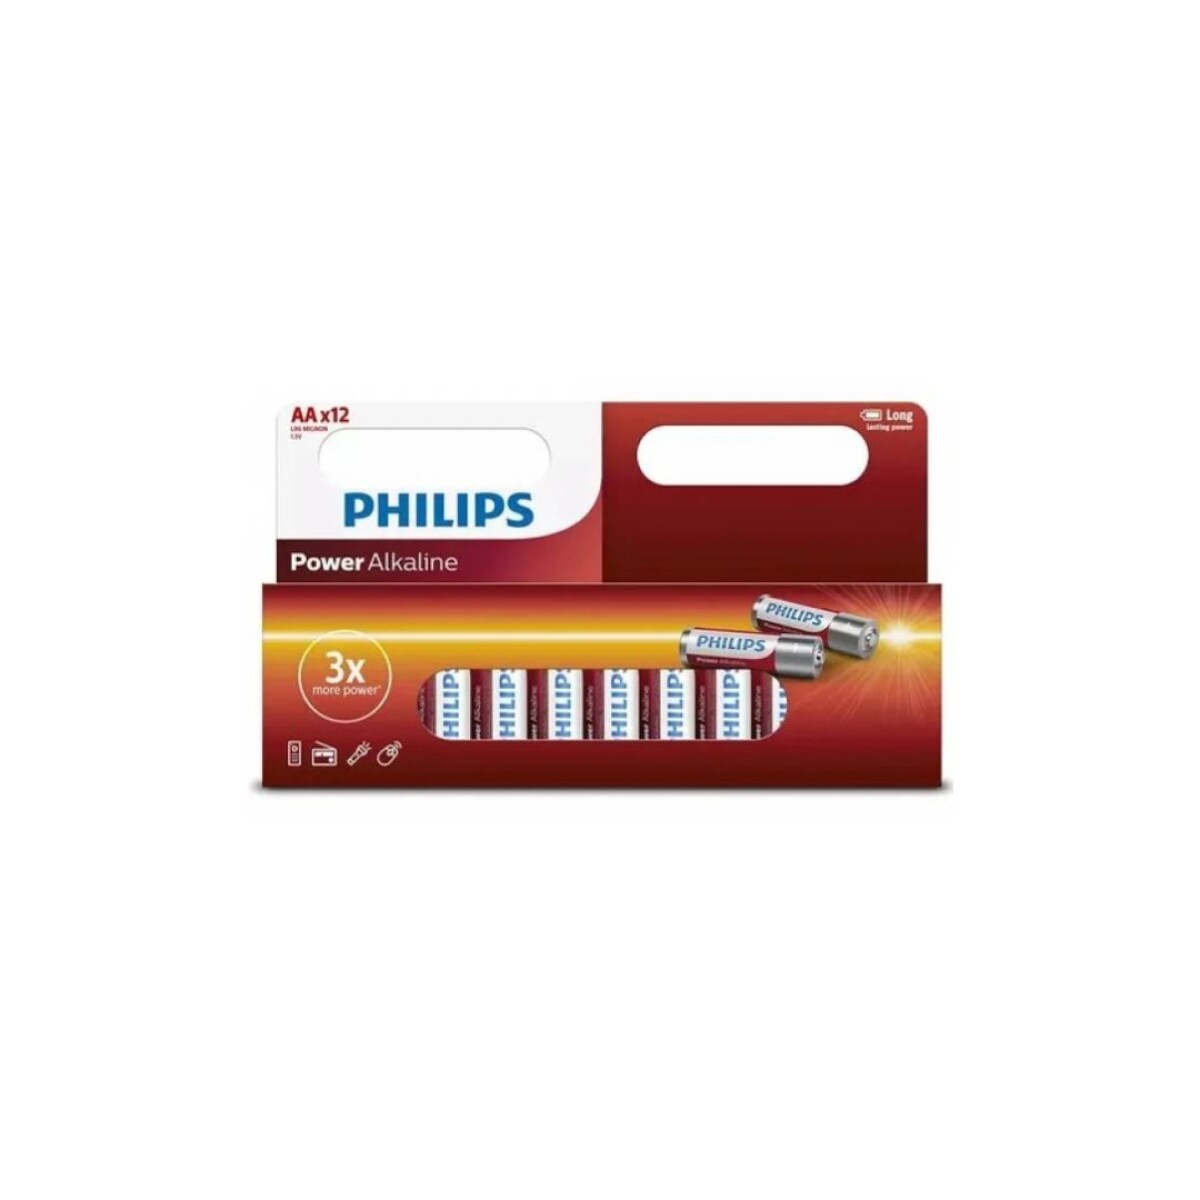 PACK PILAS AA PHILIPS X 12 UNIDADES - Sin color 